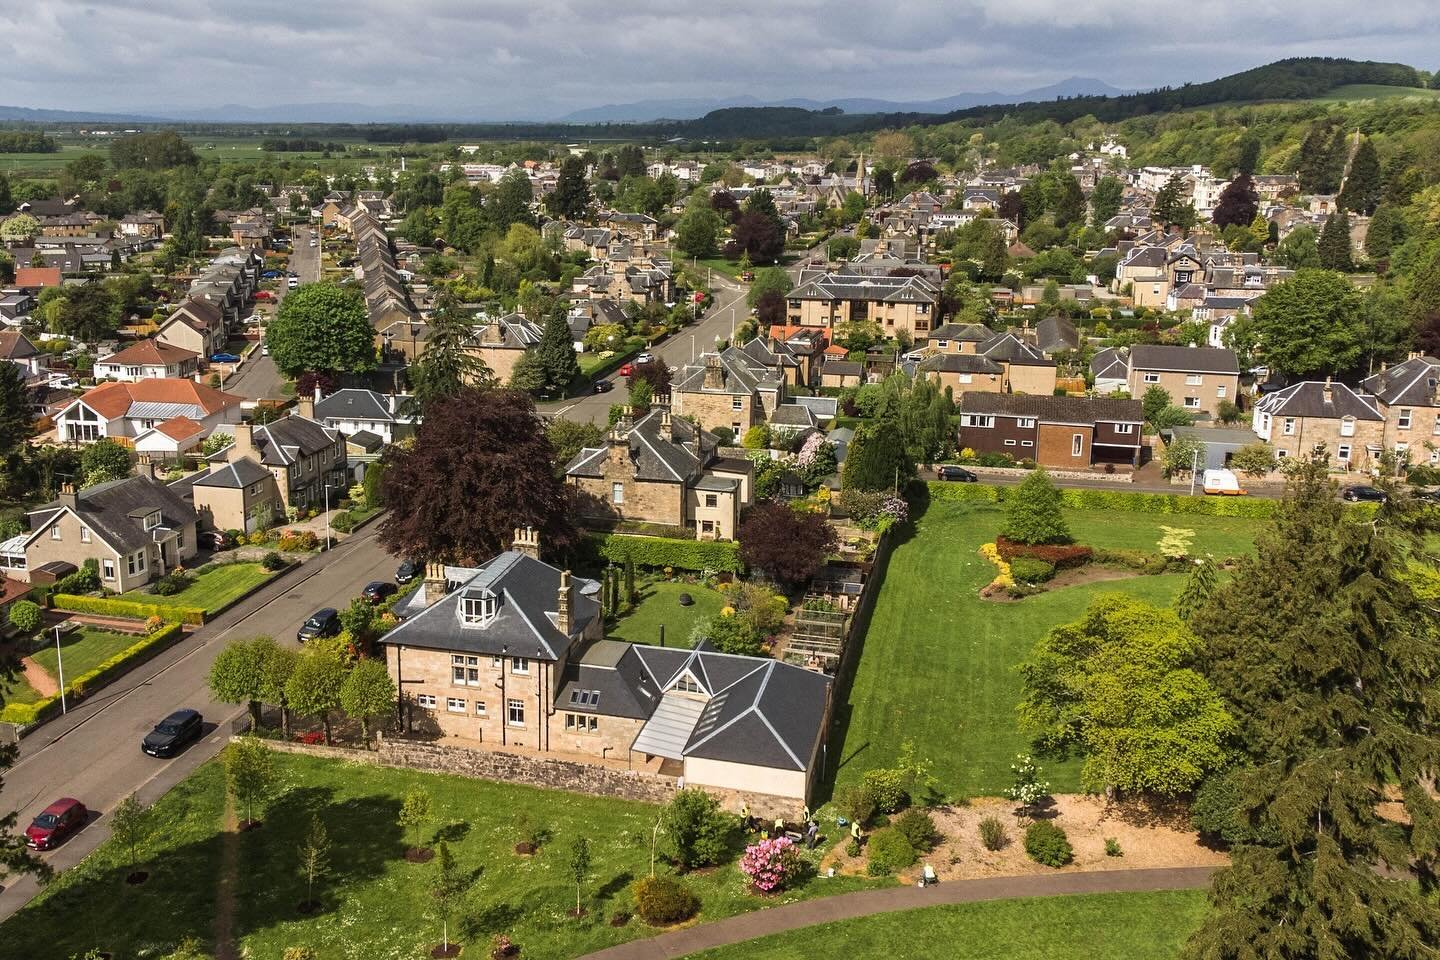 Have your say!

Bridge of Allan is a great place to live, work and visit. With its rich history, vibrant local economy, river, parks and woodland walks, local/national transport links, and the excellence of Stirling University on its doorstep, the &l